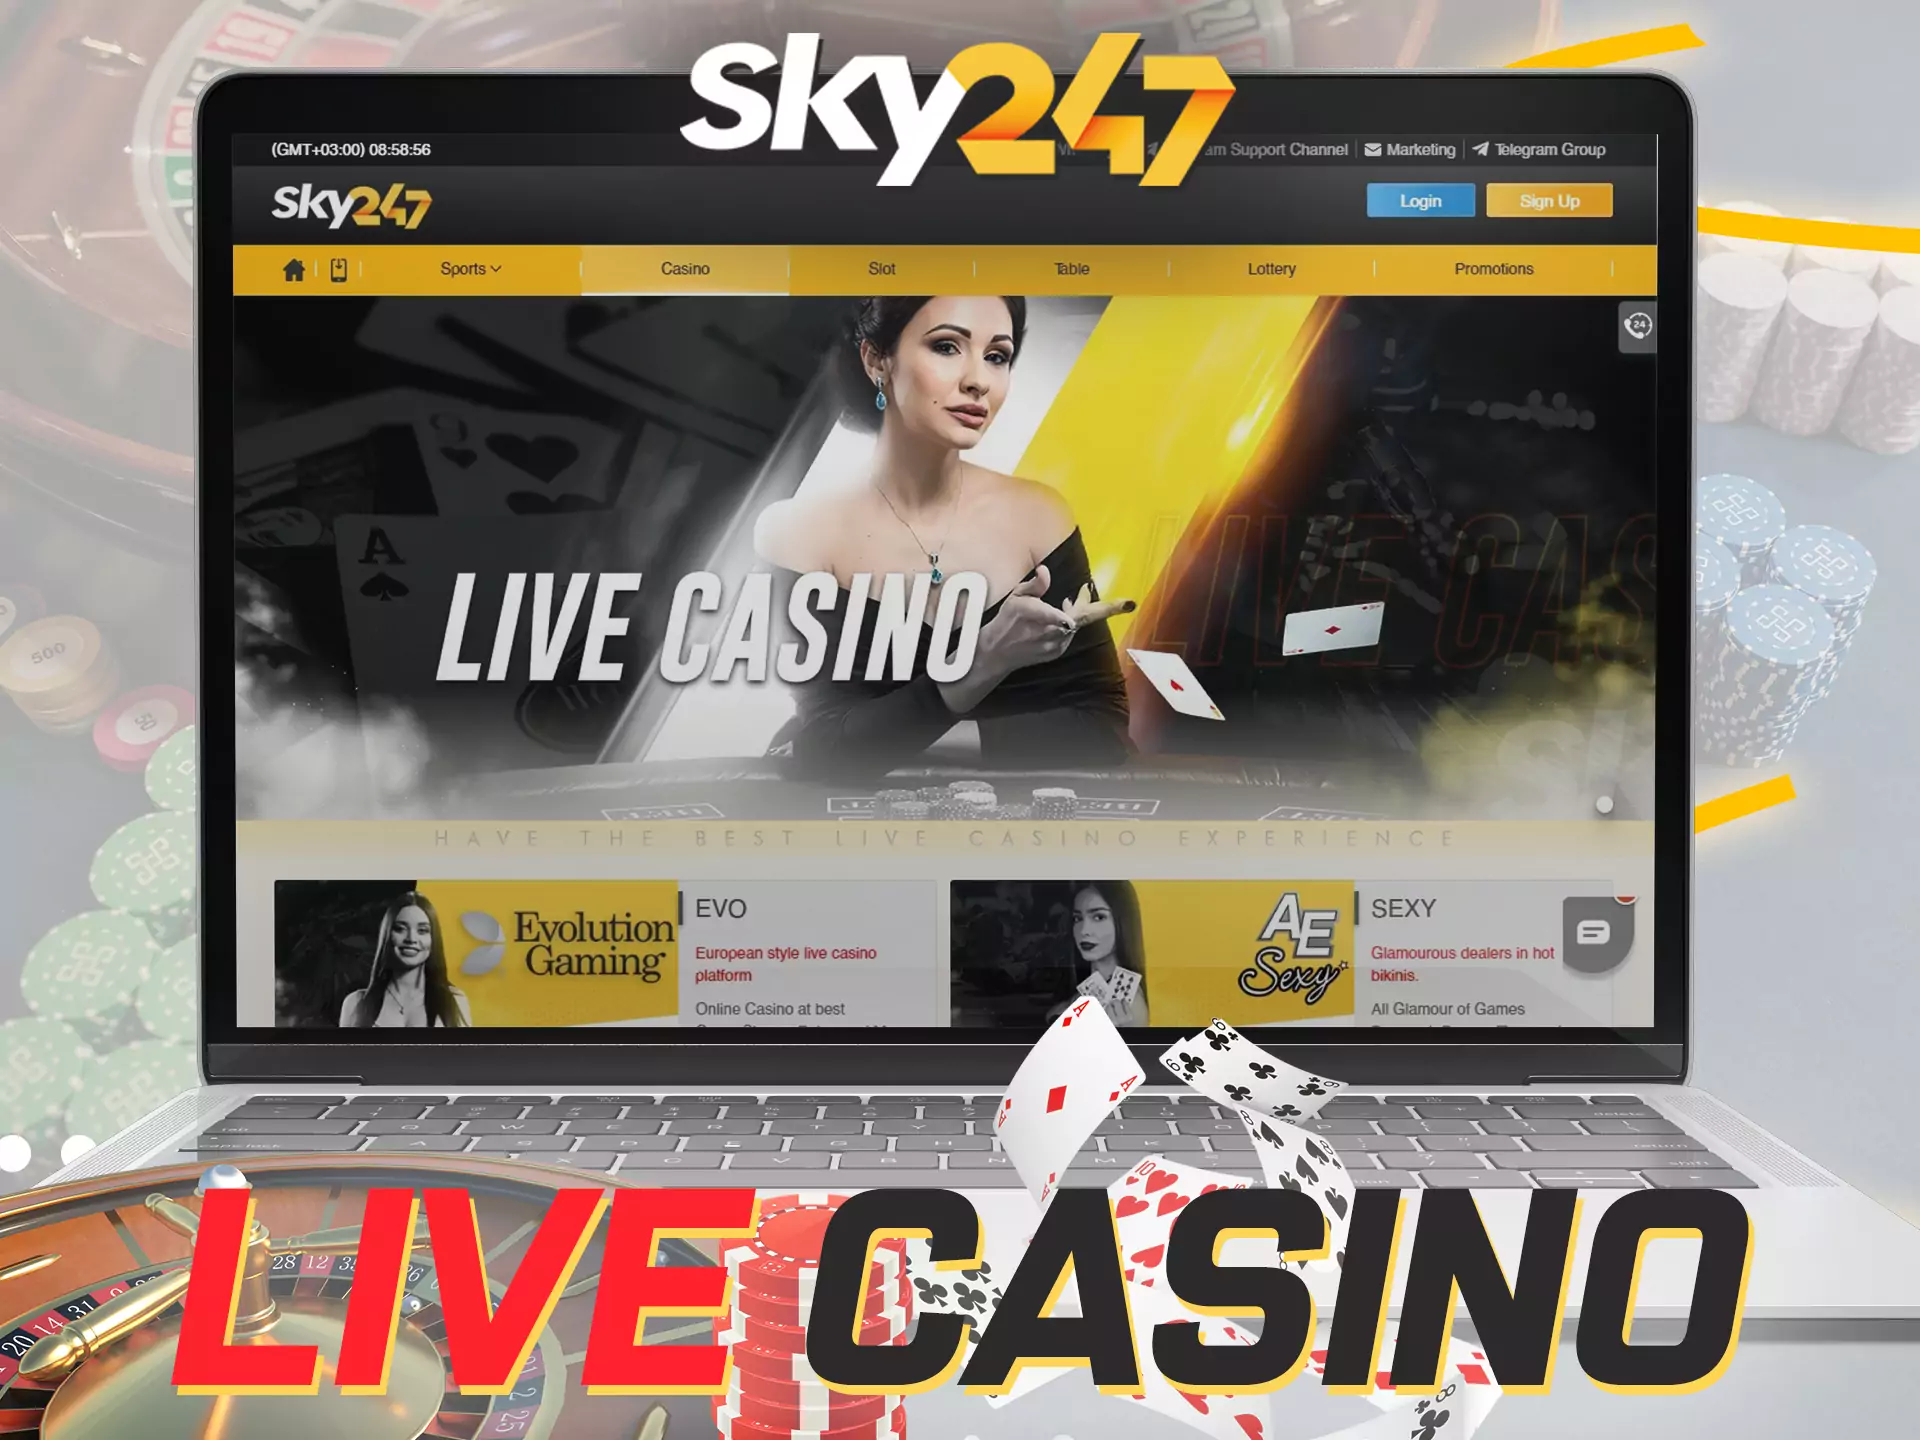 On Sky247 you can play games with live dealers in the casino.